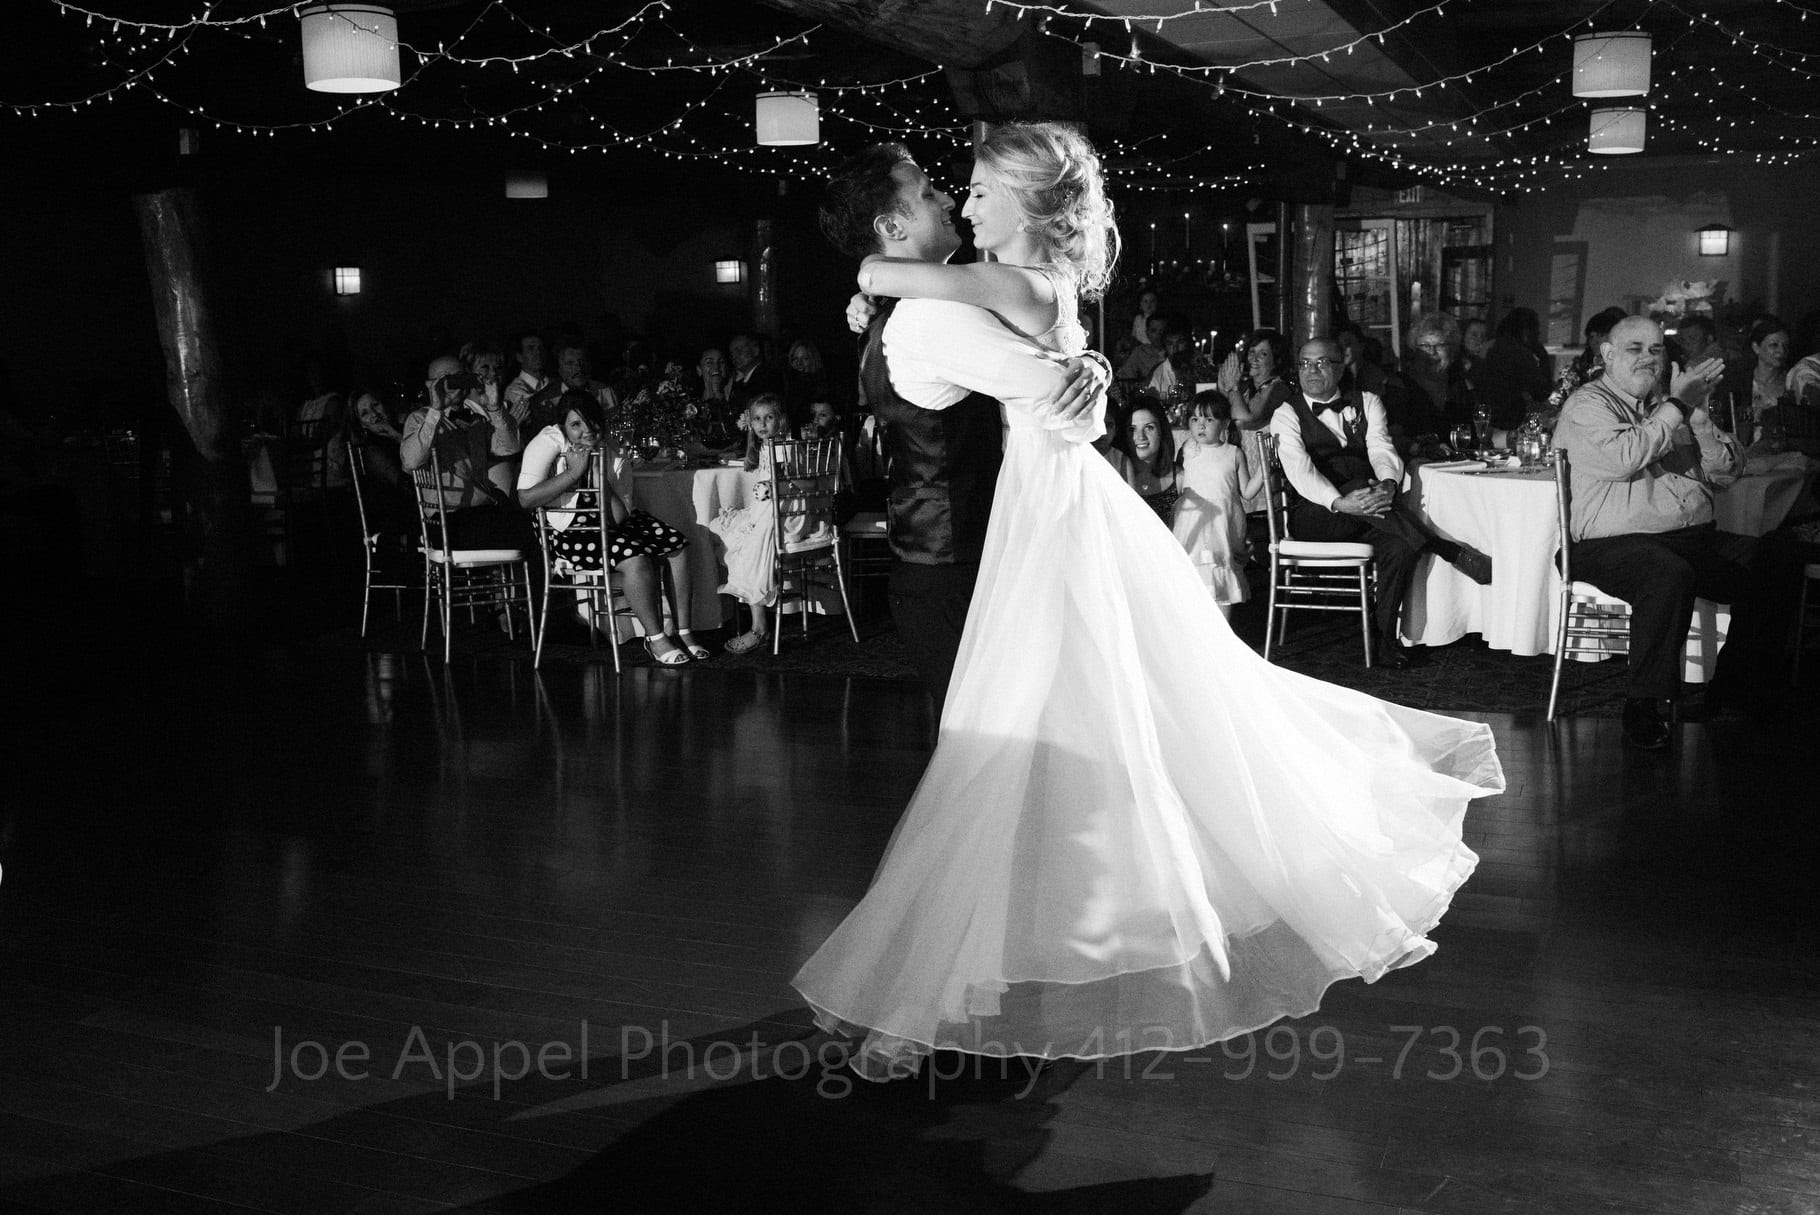 A bride's dress floats in the air as her groom picks her up and spins her around at the end of their first dance during their Seven Springs Wedding.